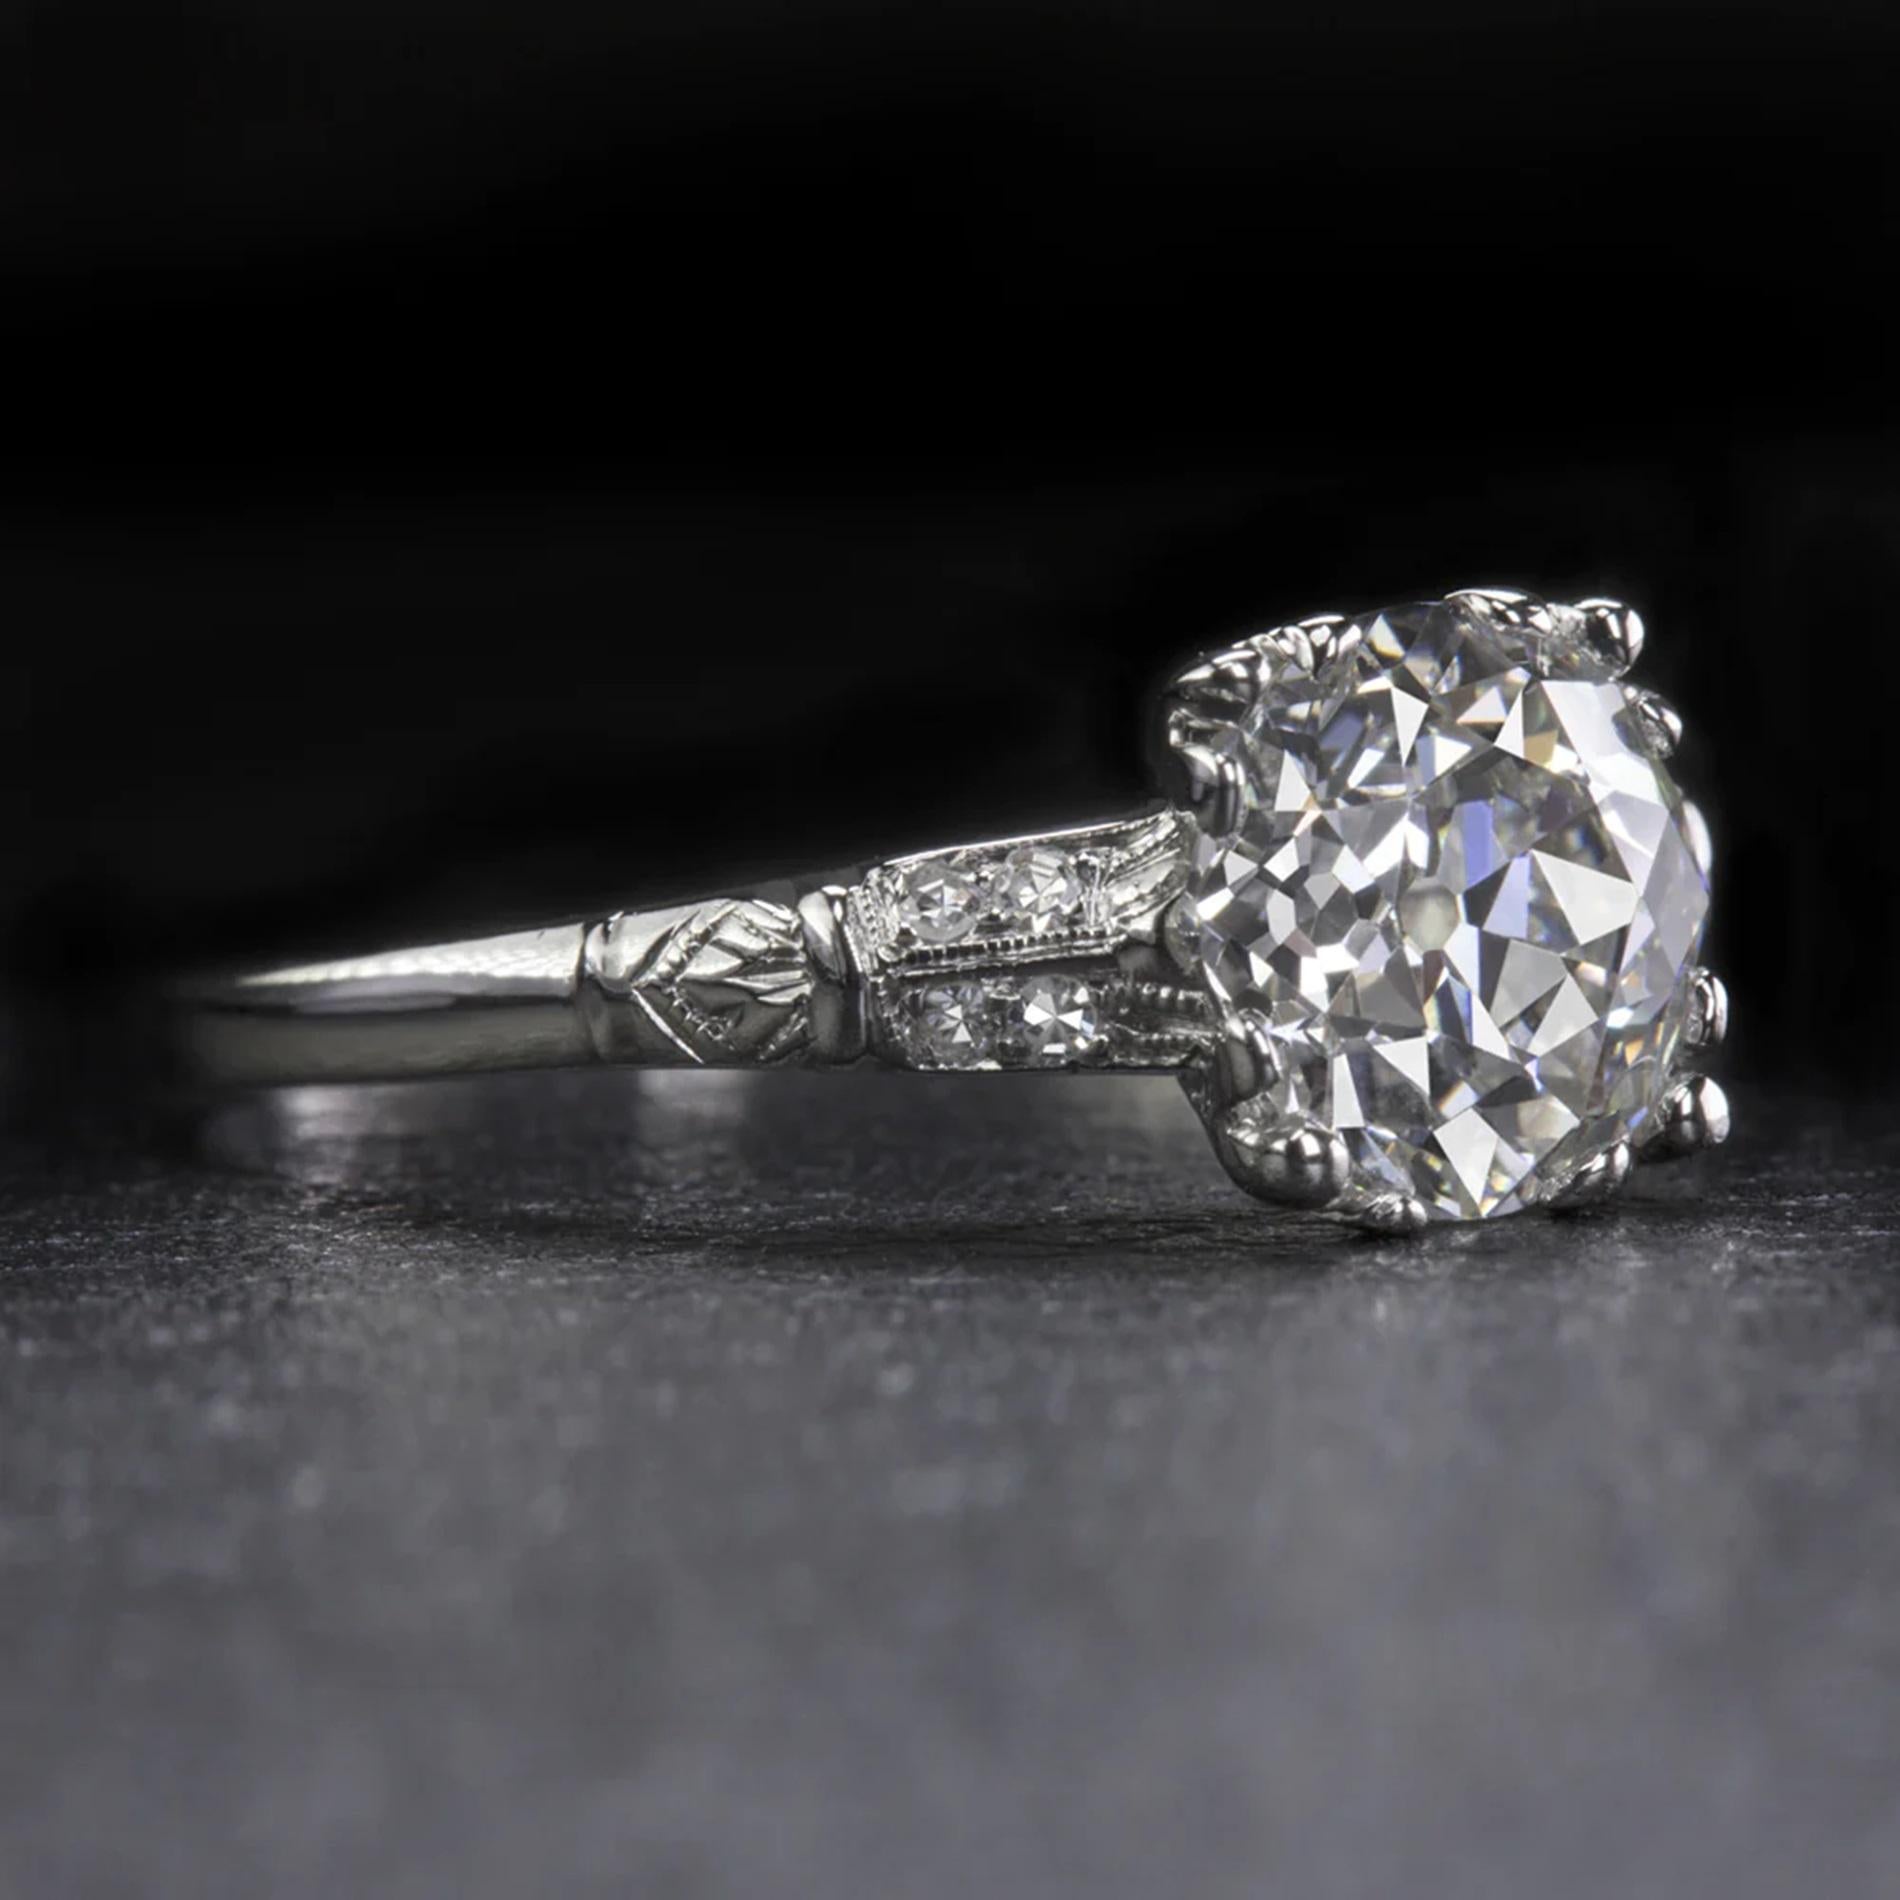 Discover the timeless elegance of this stunning original Art Deco diamond ring, a piece that truly stands out with its exceptional quality. At the heart of this ring lies a breathtakingly beautiful 2.06ct Old European cut diamond, certified and